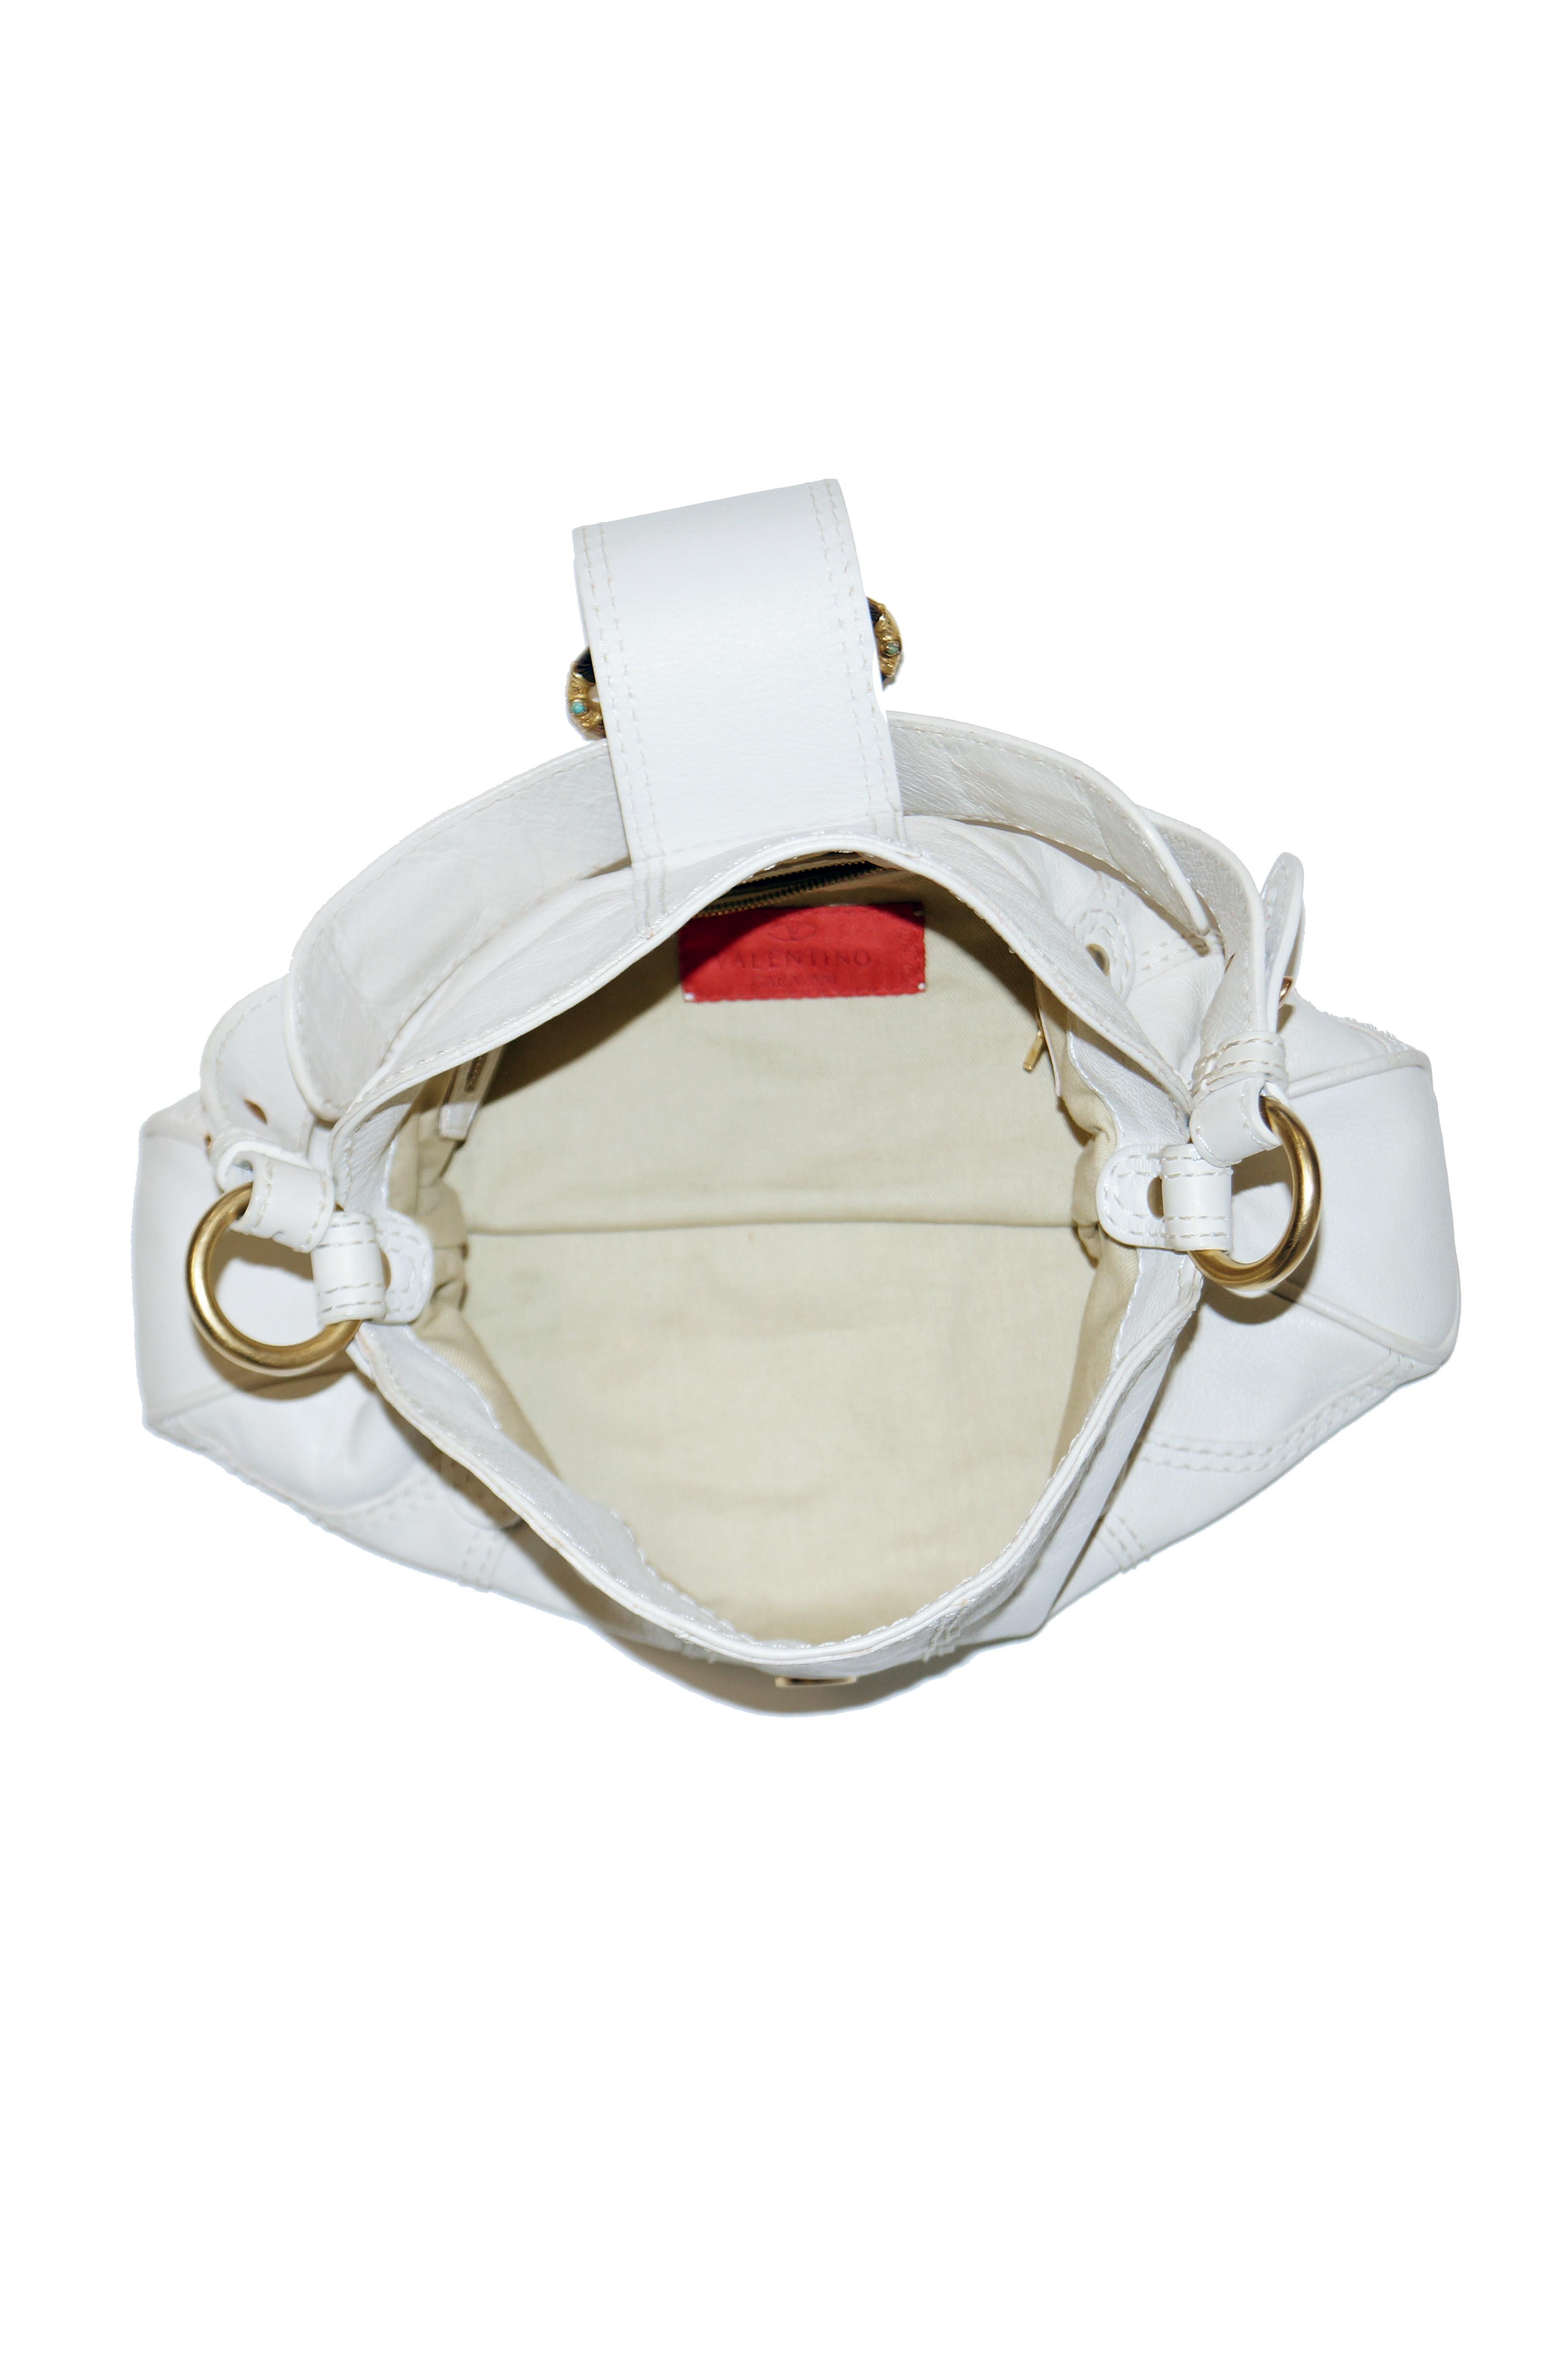 Valentino Leather Off White Rock Studded Shoulder Bag  In Excellent Condition For Sale In Houston, TX